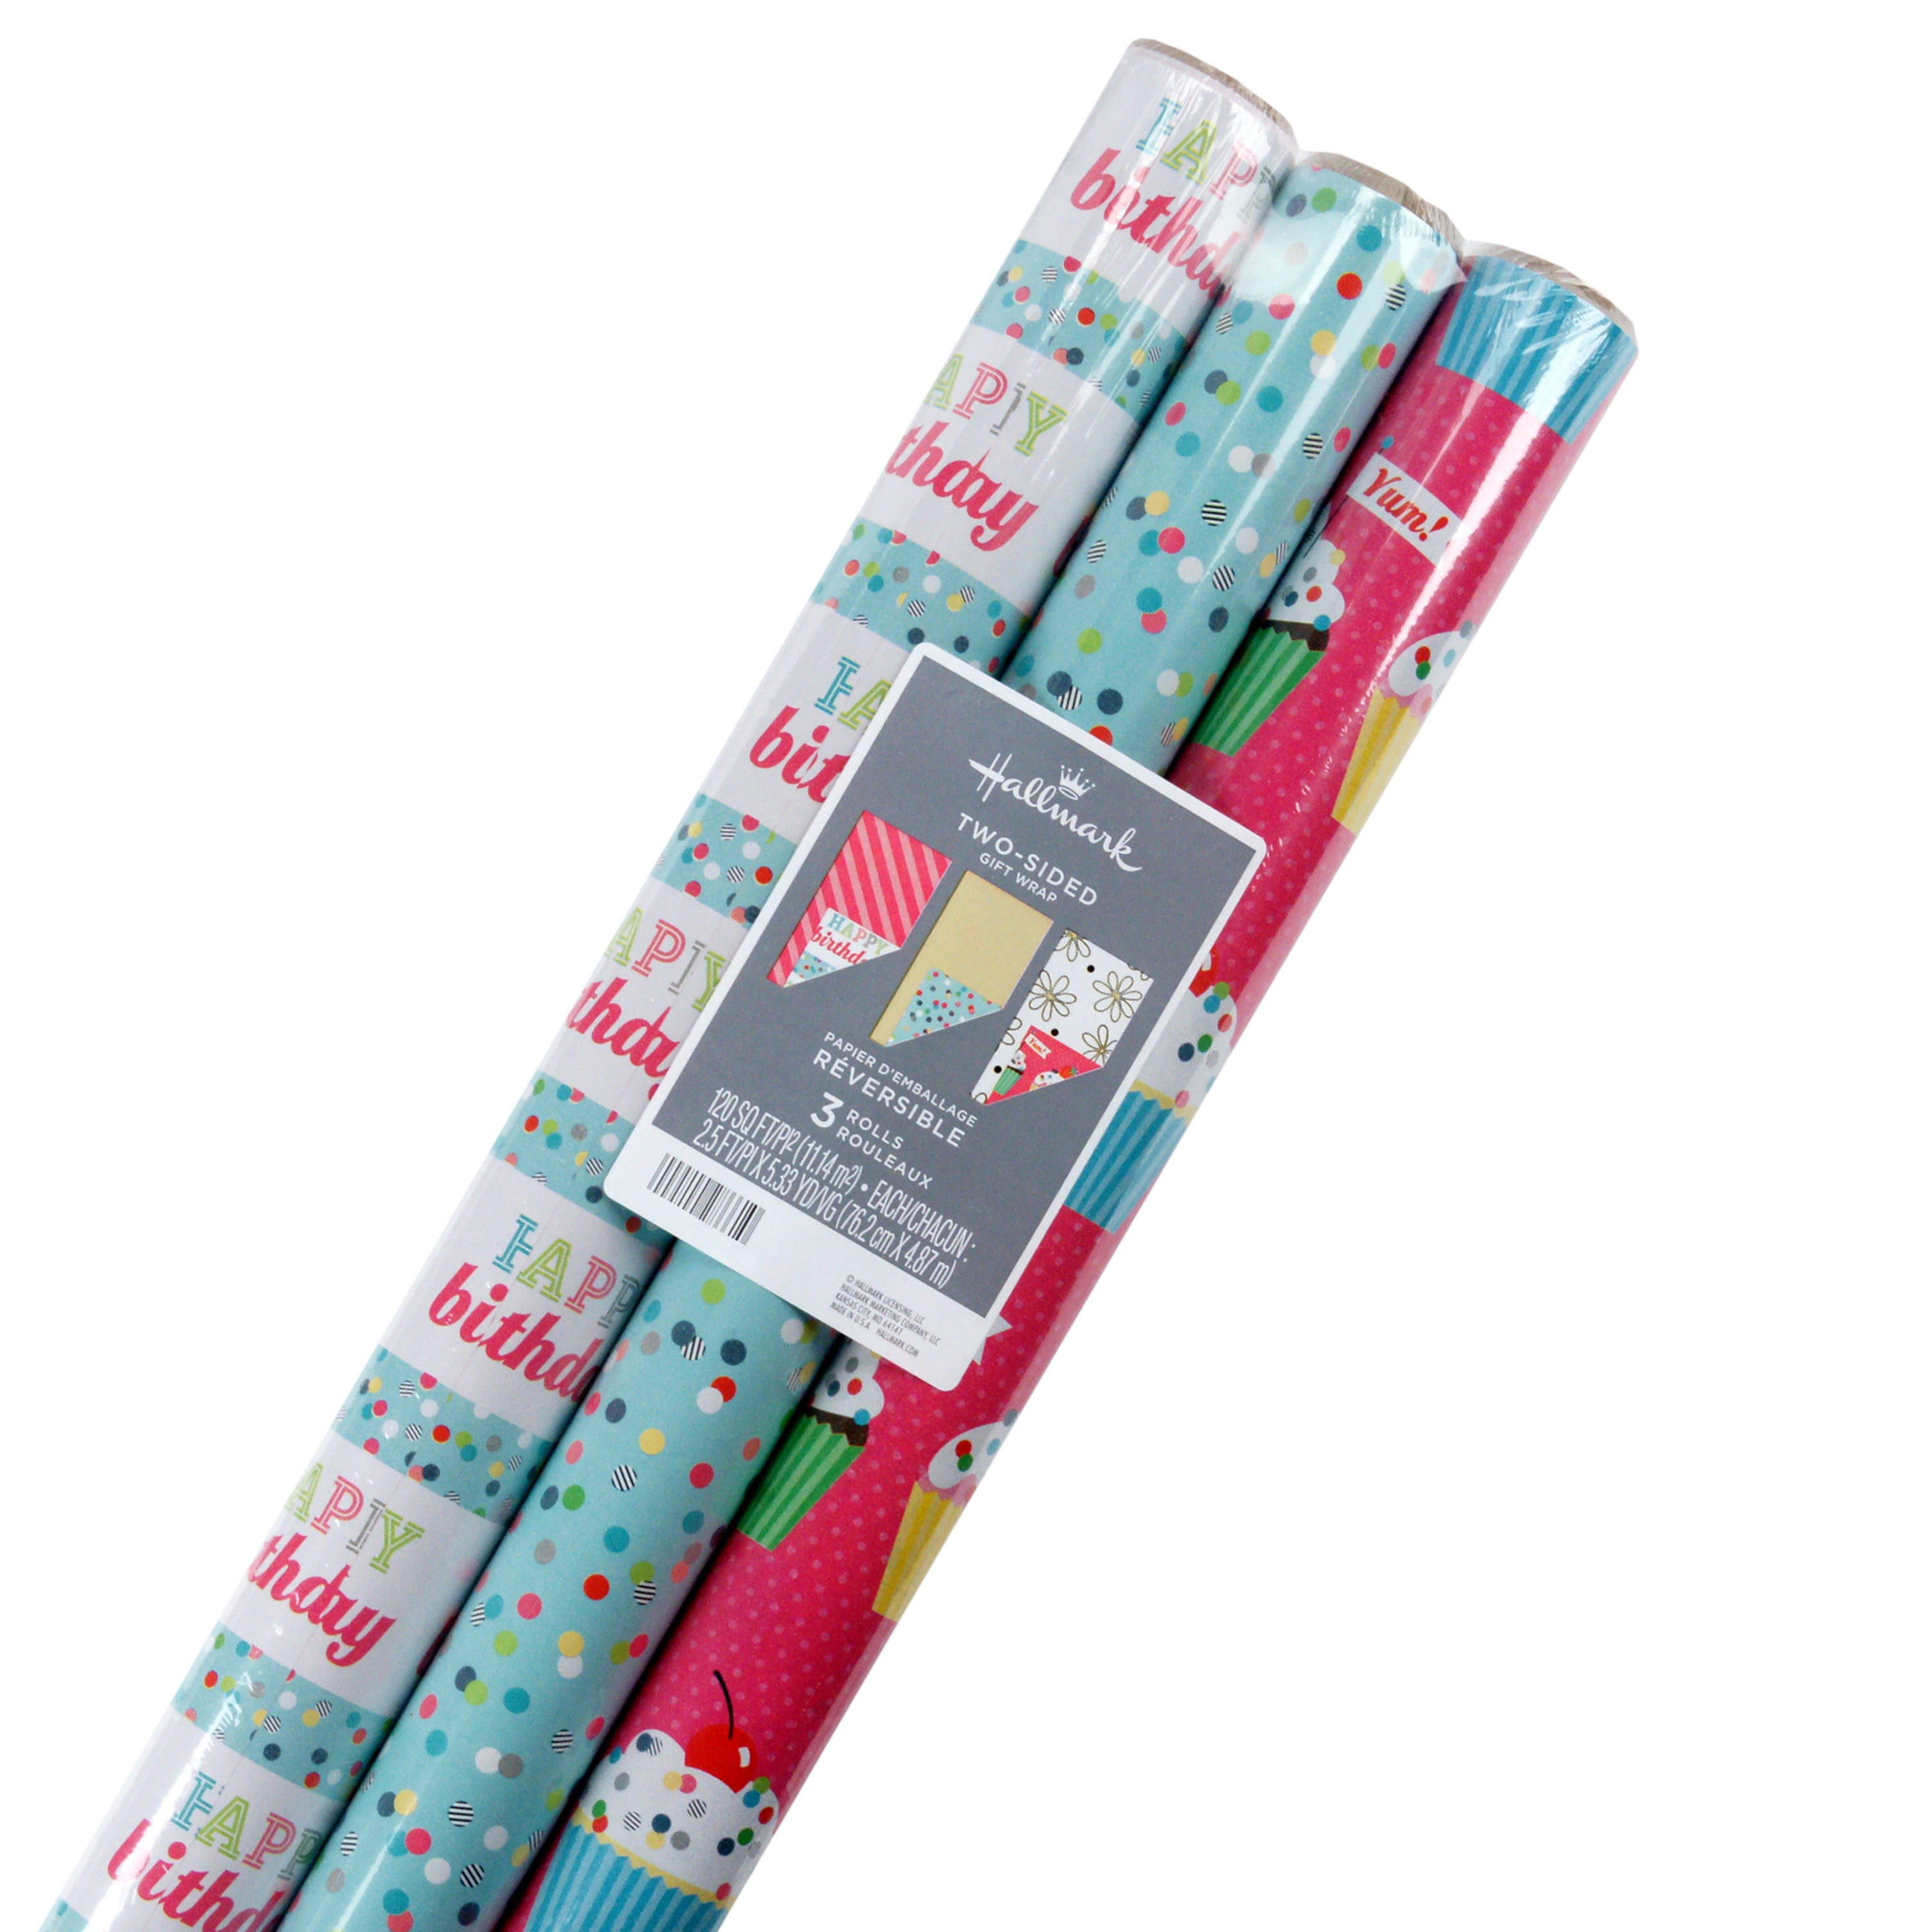  Hallmark Reversible Kids Birthday Wrapping Paper (3 Rolls: 120  sq. ft. ttl.) Monsters and Unicorns, Polka Dots, Chevron, Pink, Teal, Blue,  Red, Orange, Lime Green : Health & Household